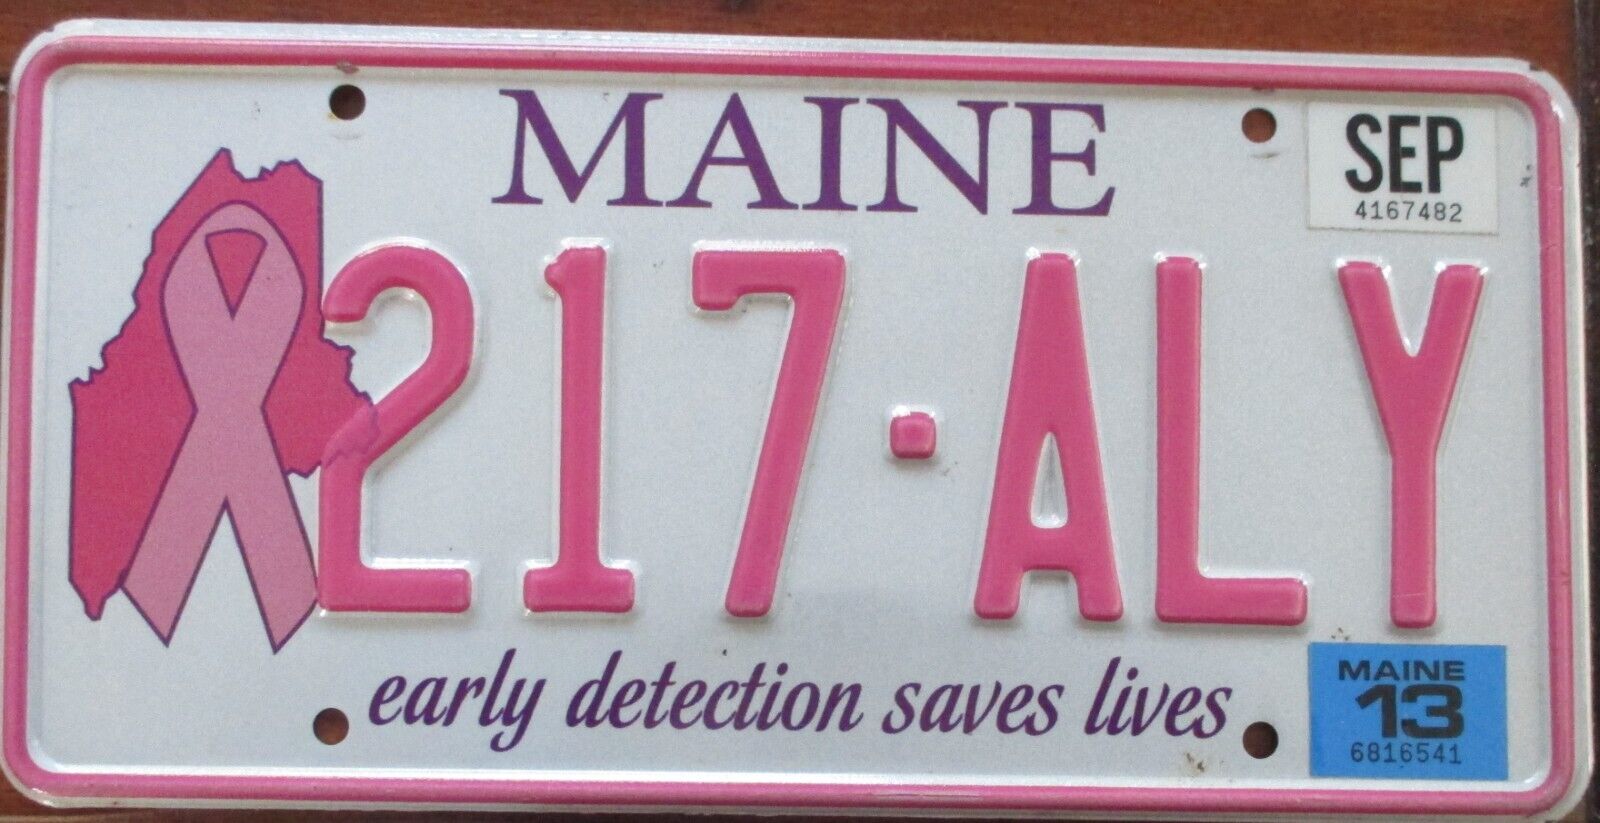 2013 MAINE EARLY DETECTION SAVES LIVES CANCER LICENSE PLATE # 217 ALY